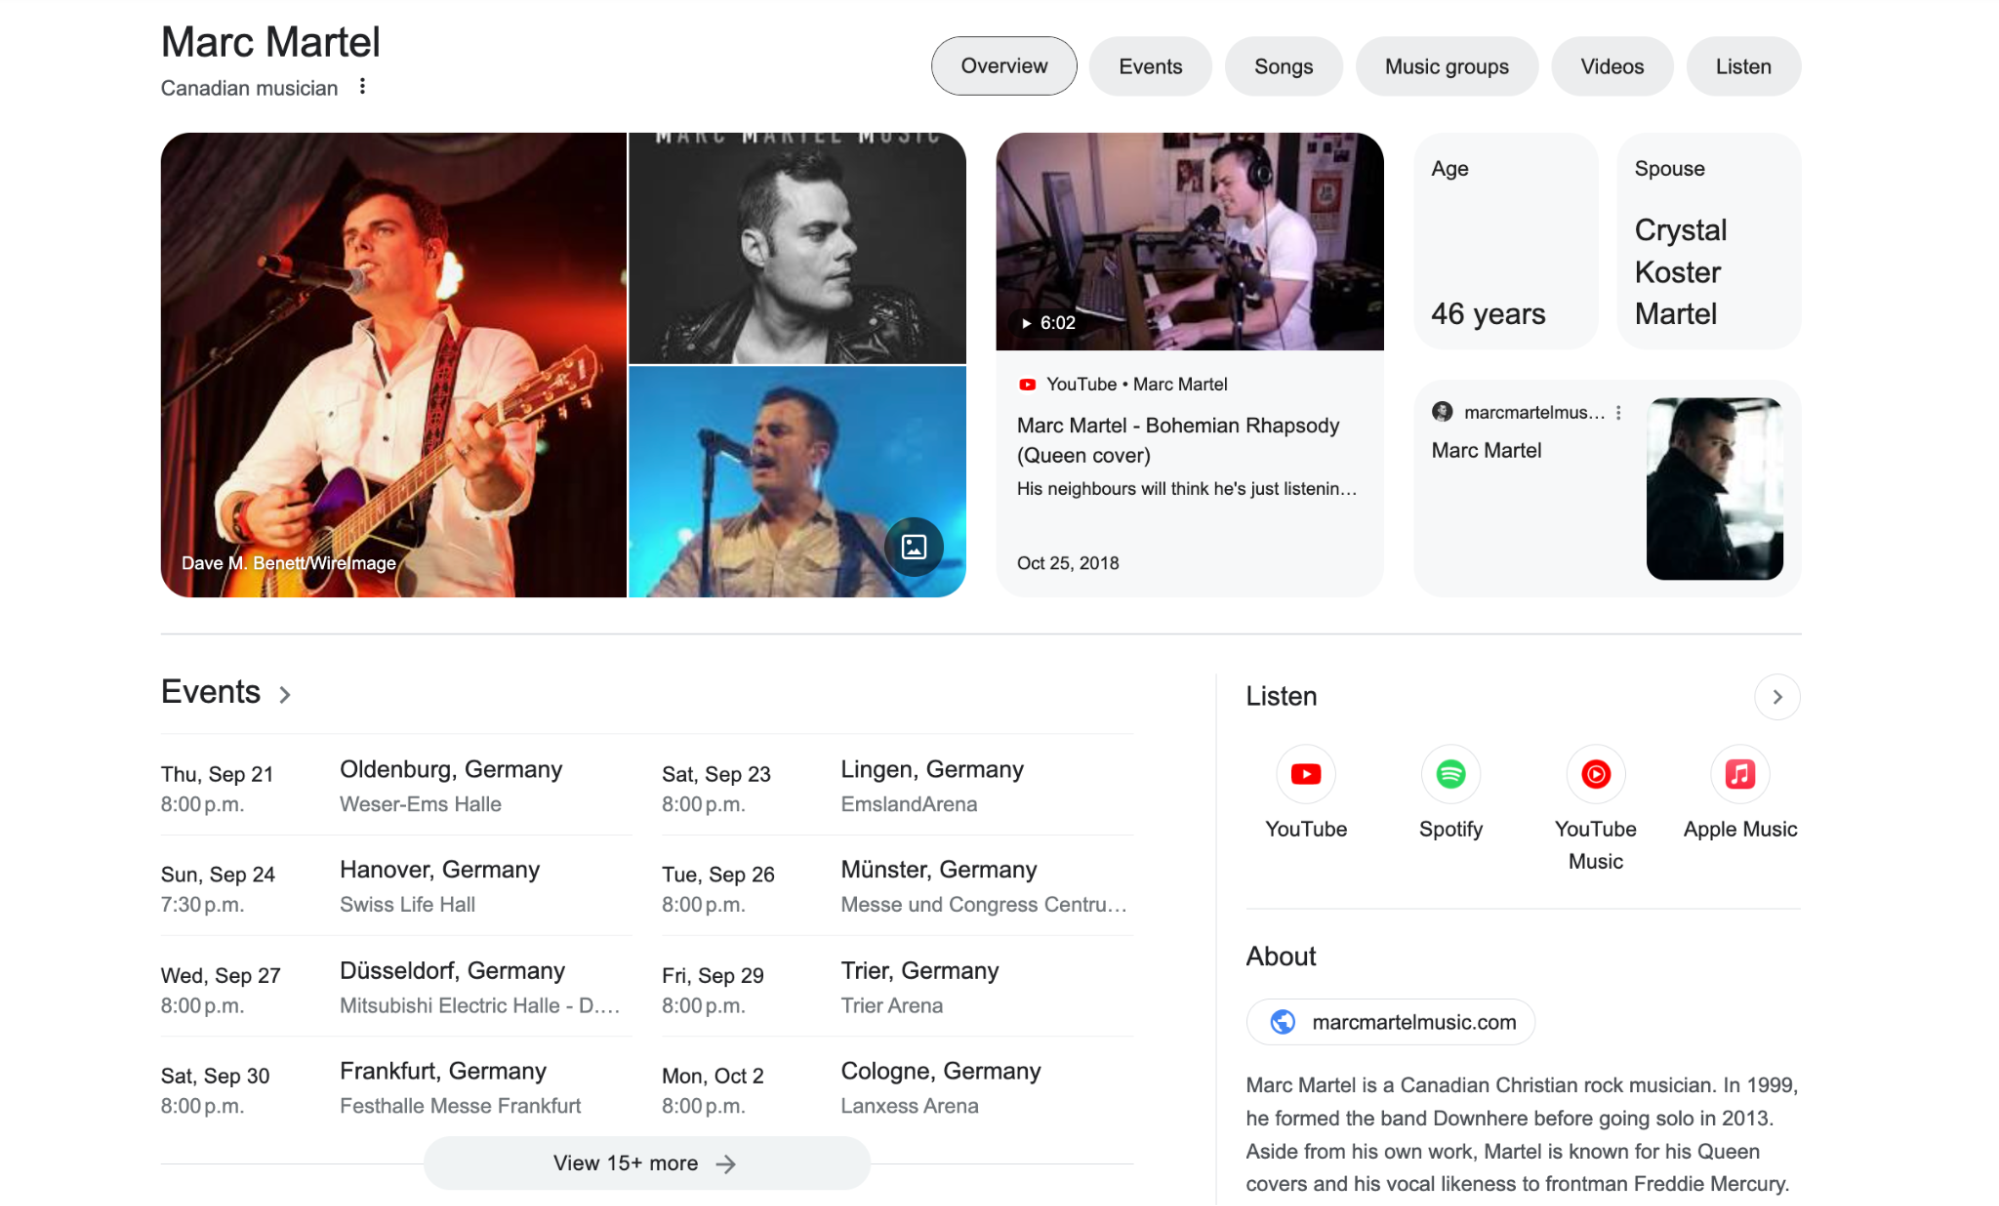 Screenshot of artist Marc Martel's Google SERP page, displaying events listings amongst other content